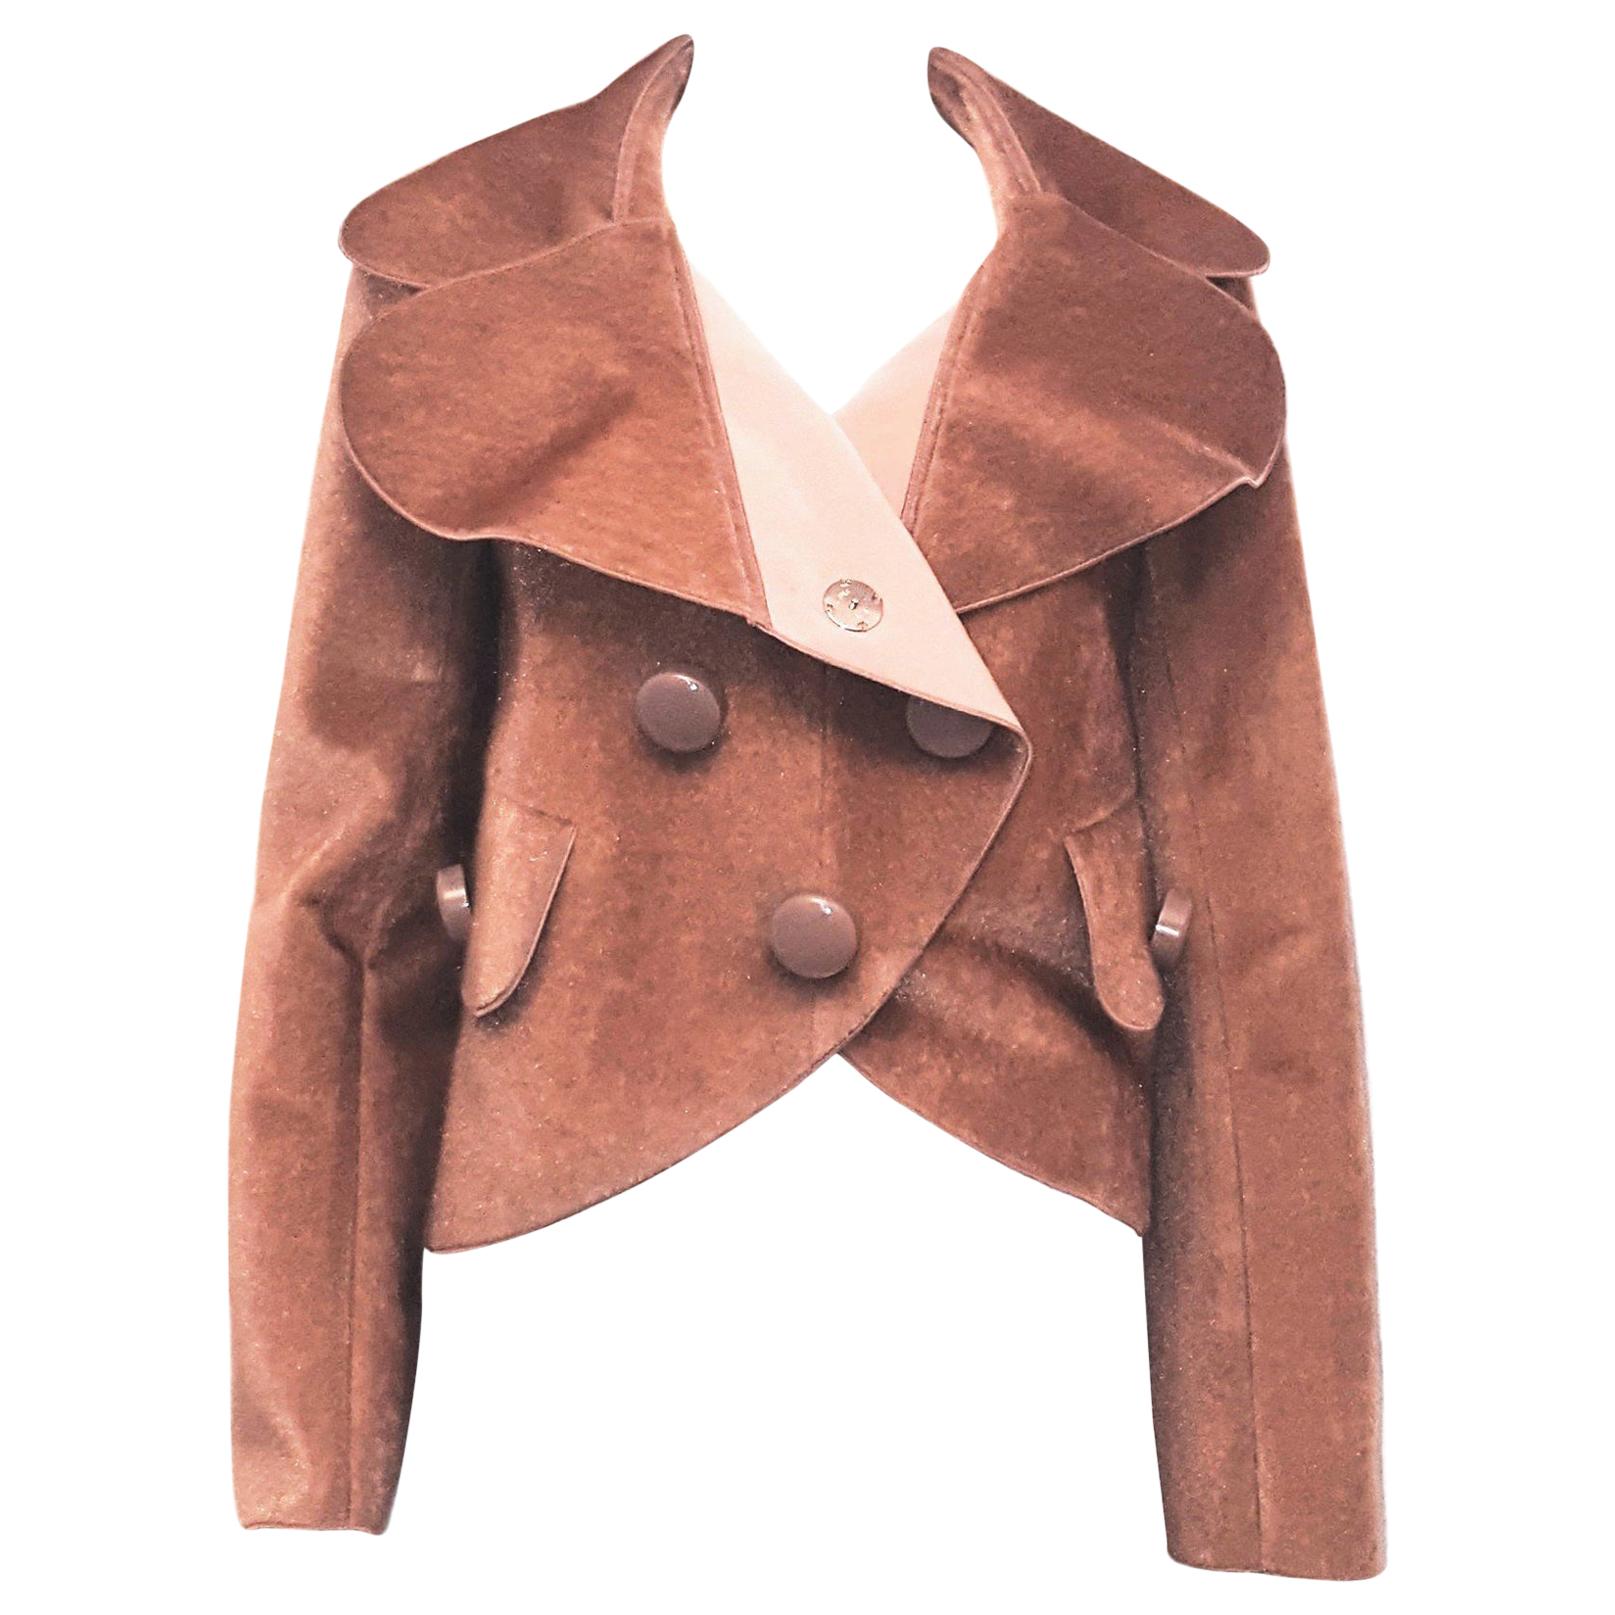 Louis Vuitton dusty rose double breasted wide rounded notch collar faux fur jacket resembles pony leather.  For closure, 5 hidden snaps and 5 visible large Louis Vuitton round buttons are featured.  Two wide flap pockets at front with a single